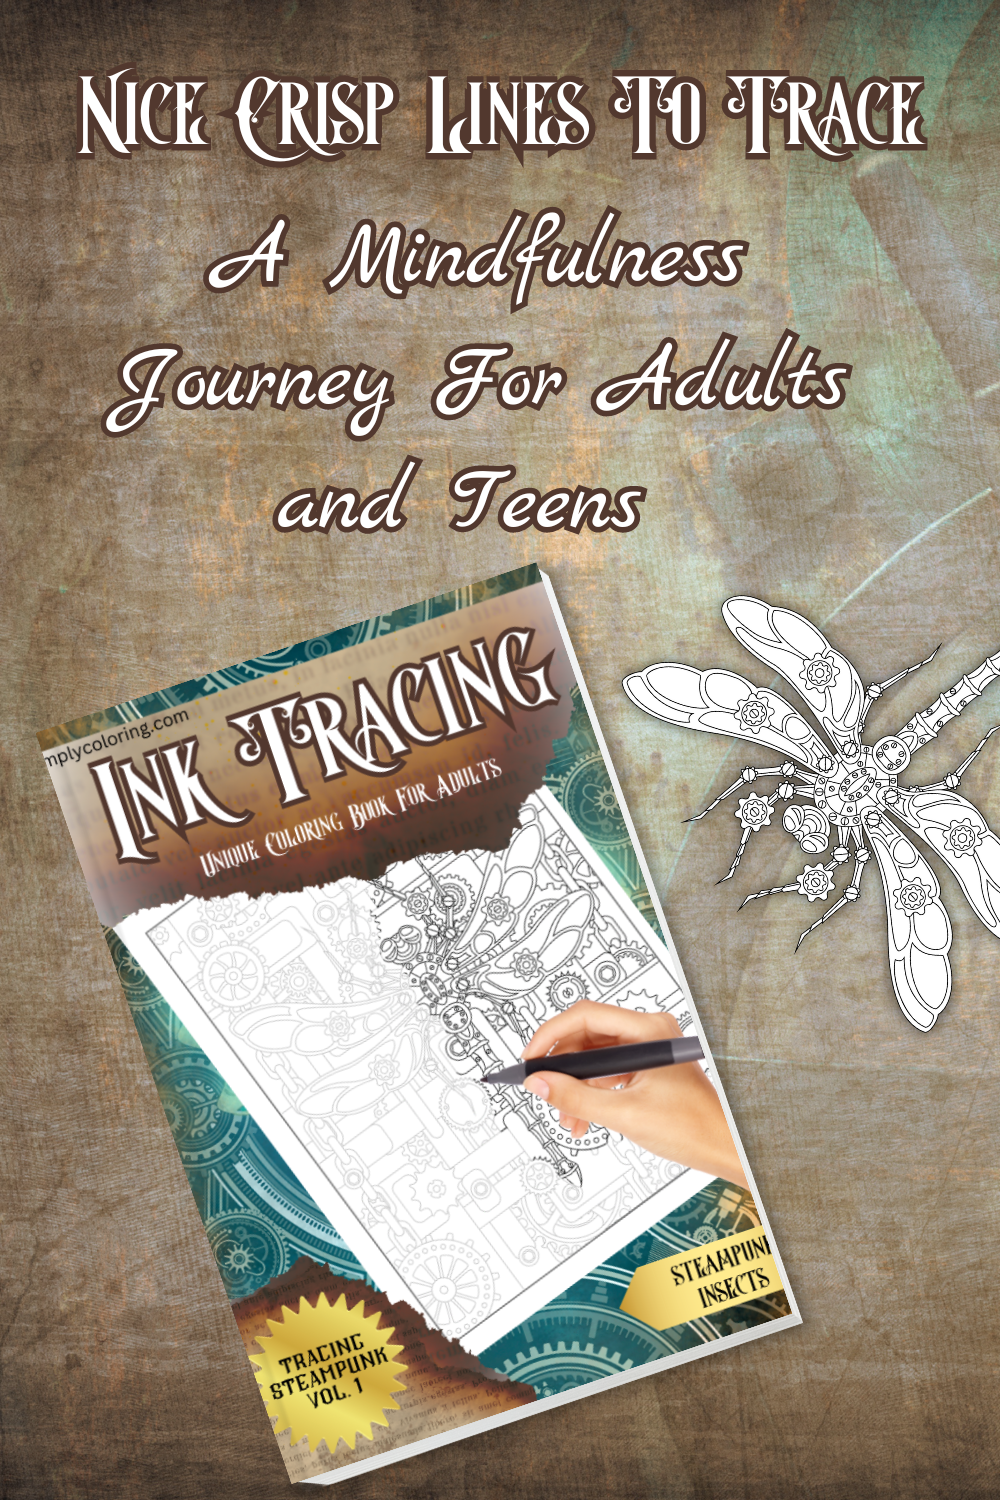 Tracing Book For Adults - Steampunk Series Vol. 1 - Steampunk Insects Printable